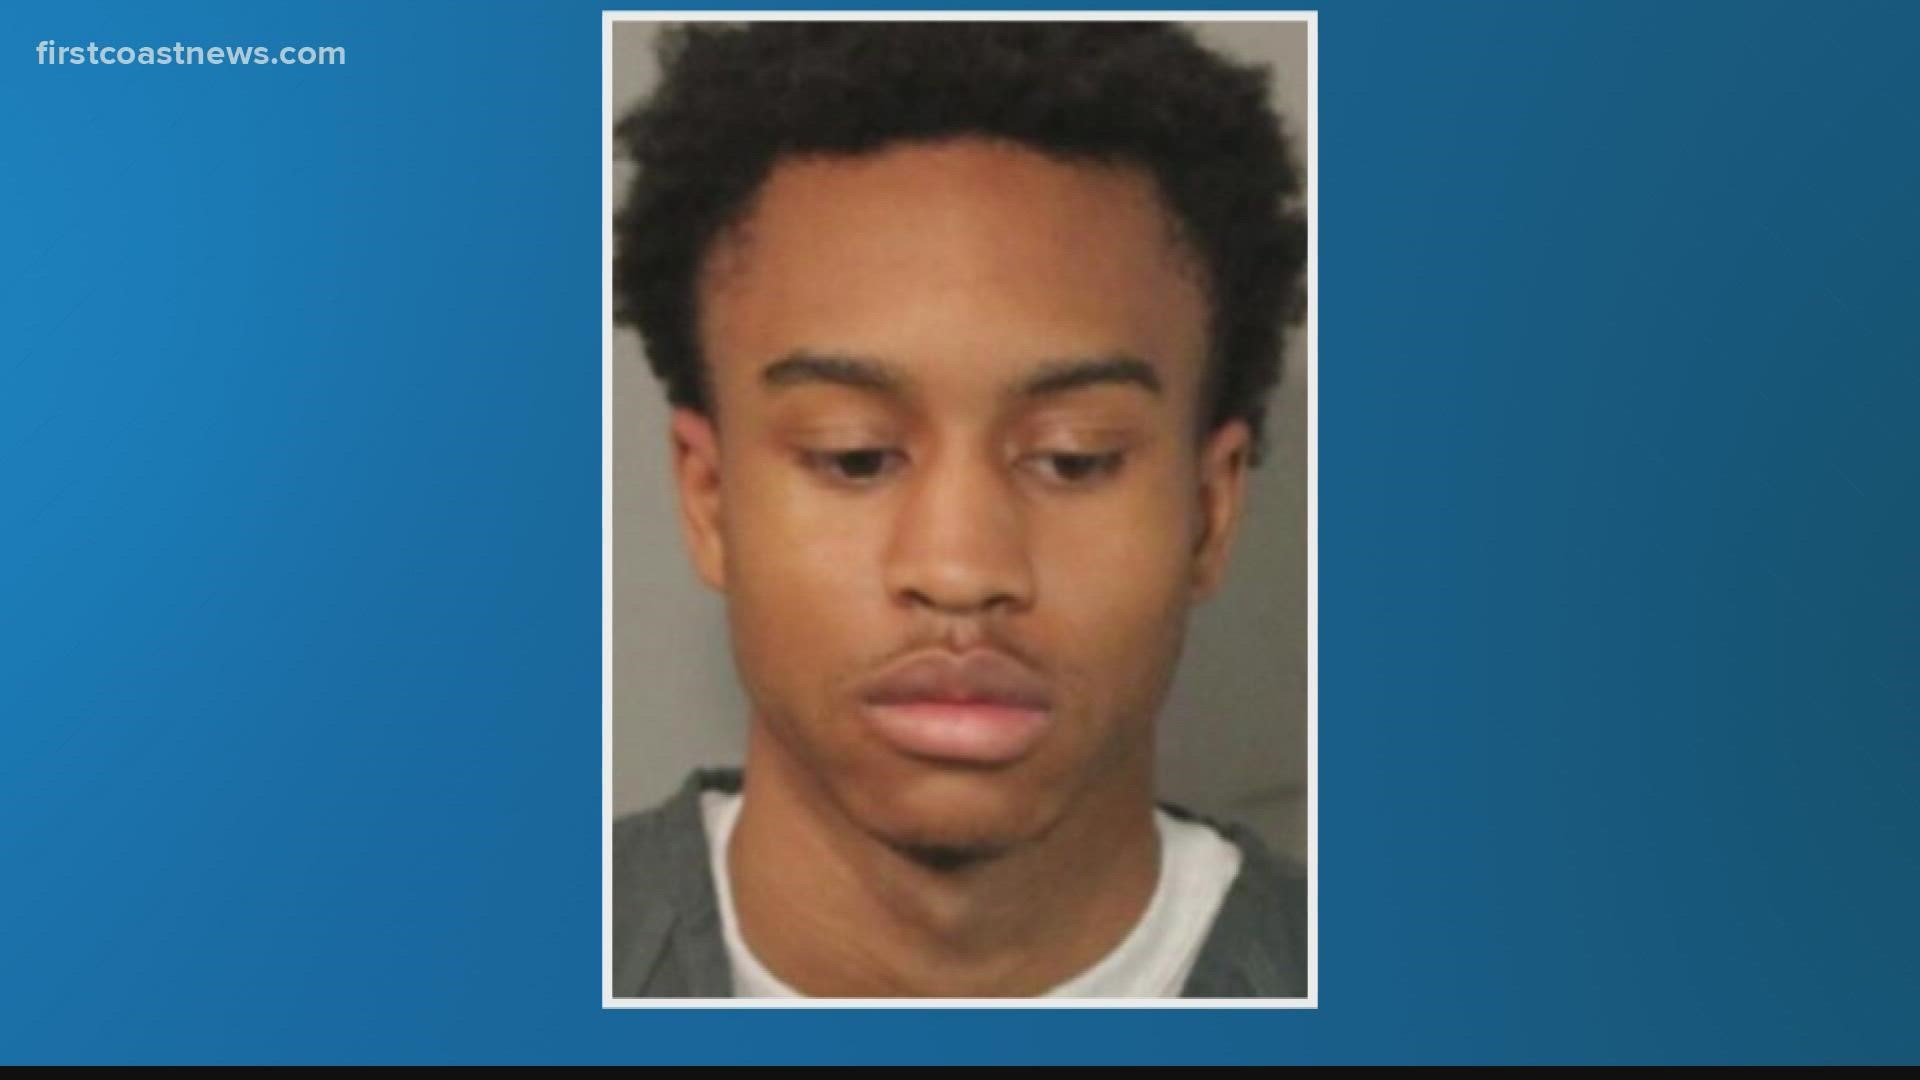 Jeffery Edwards, 19, was charged with murder, attempted murder and armed robbery in connection to the death of 18-year-old Santeria Williams.